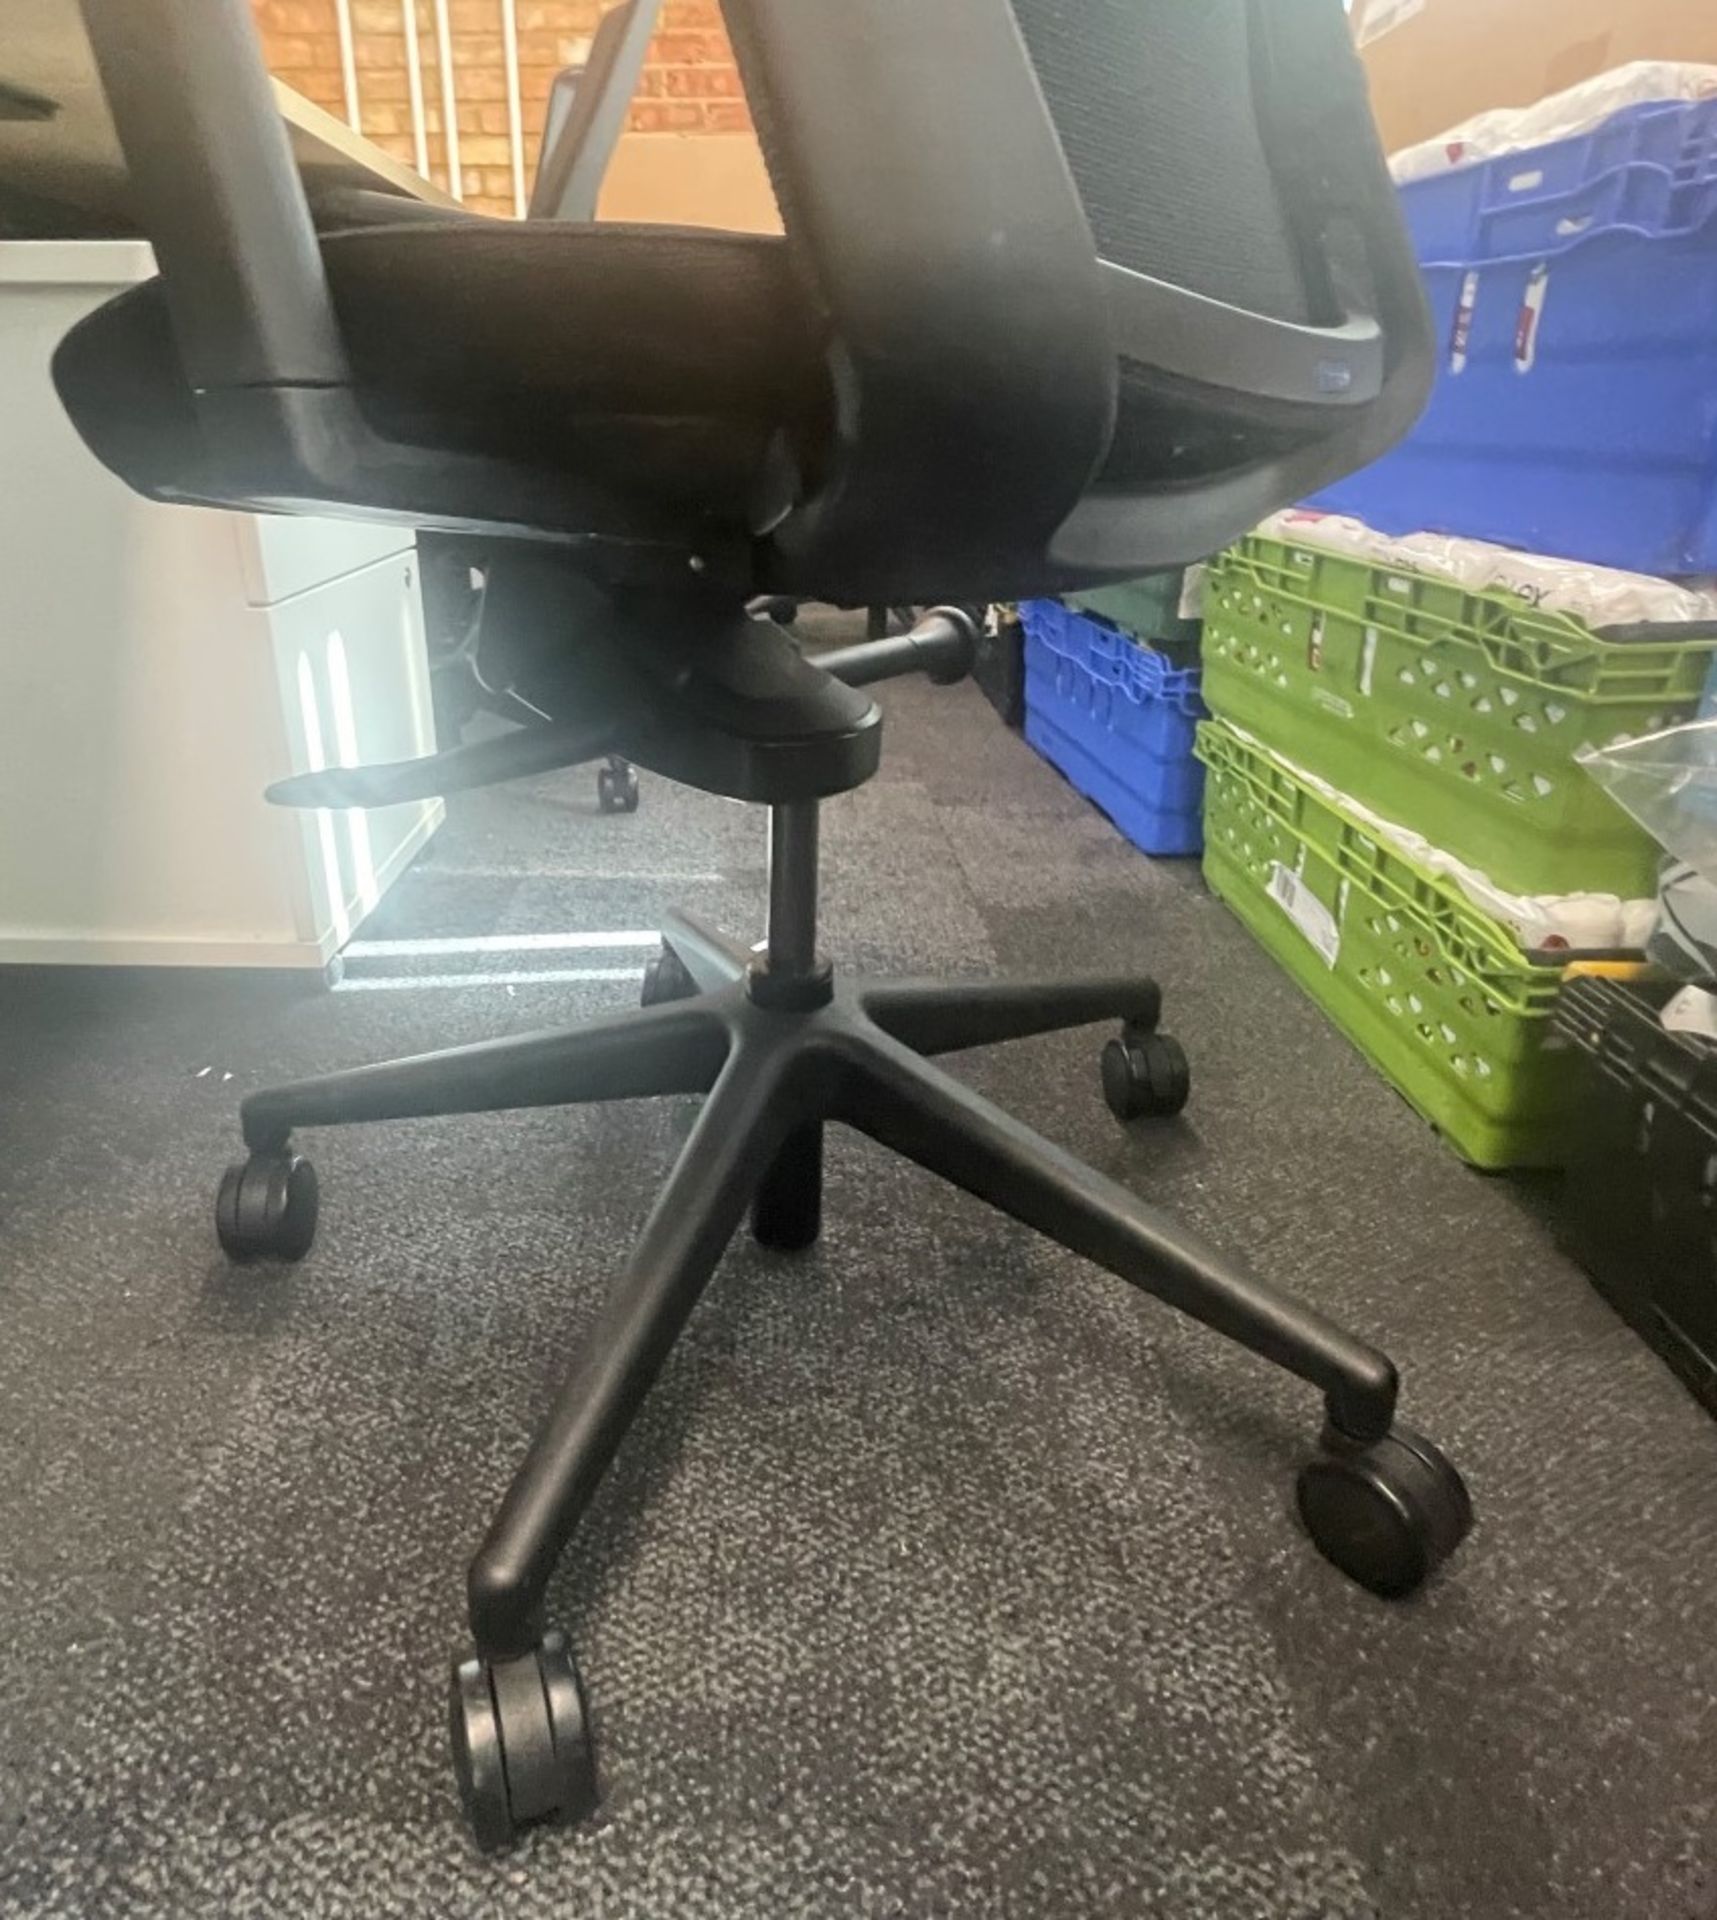 10 x BESTUHL J1 Ergonomic Office Chairs - To Be Removed From An Executive Office Environment - - Image 9 of 15